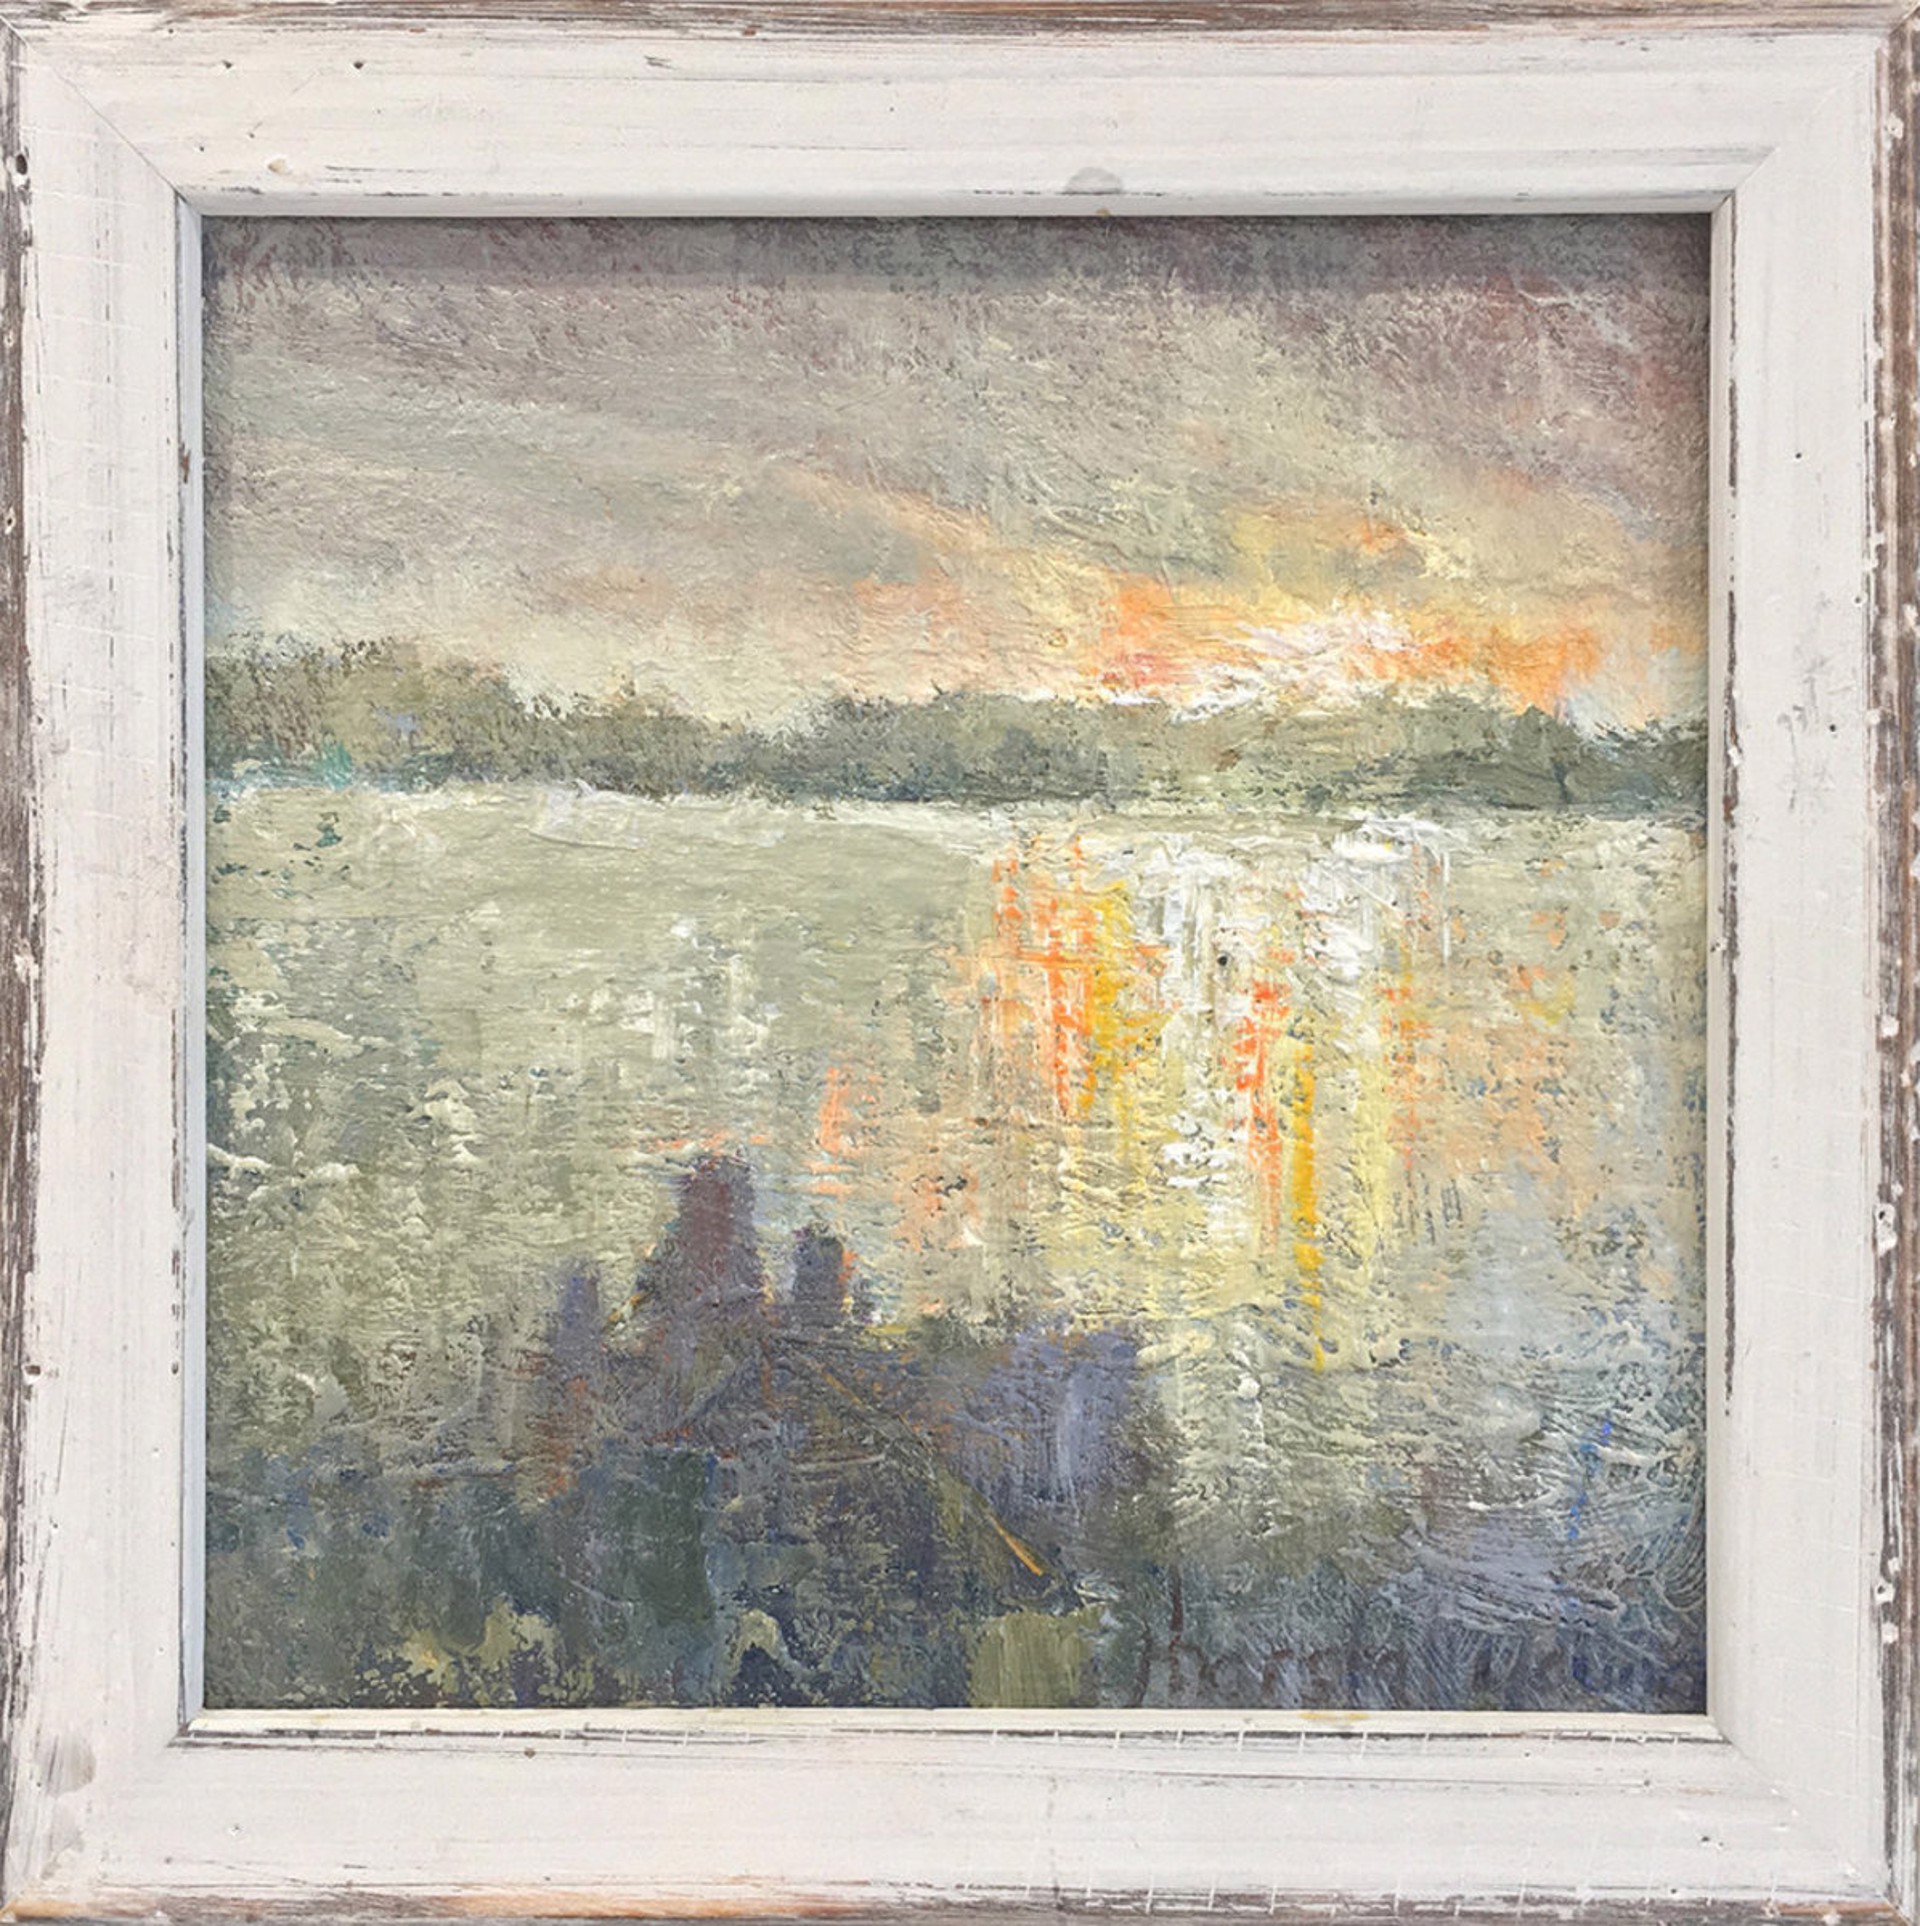 Fishing at Sunrise (L441) by Joan Horsfall Young